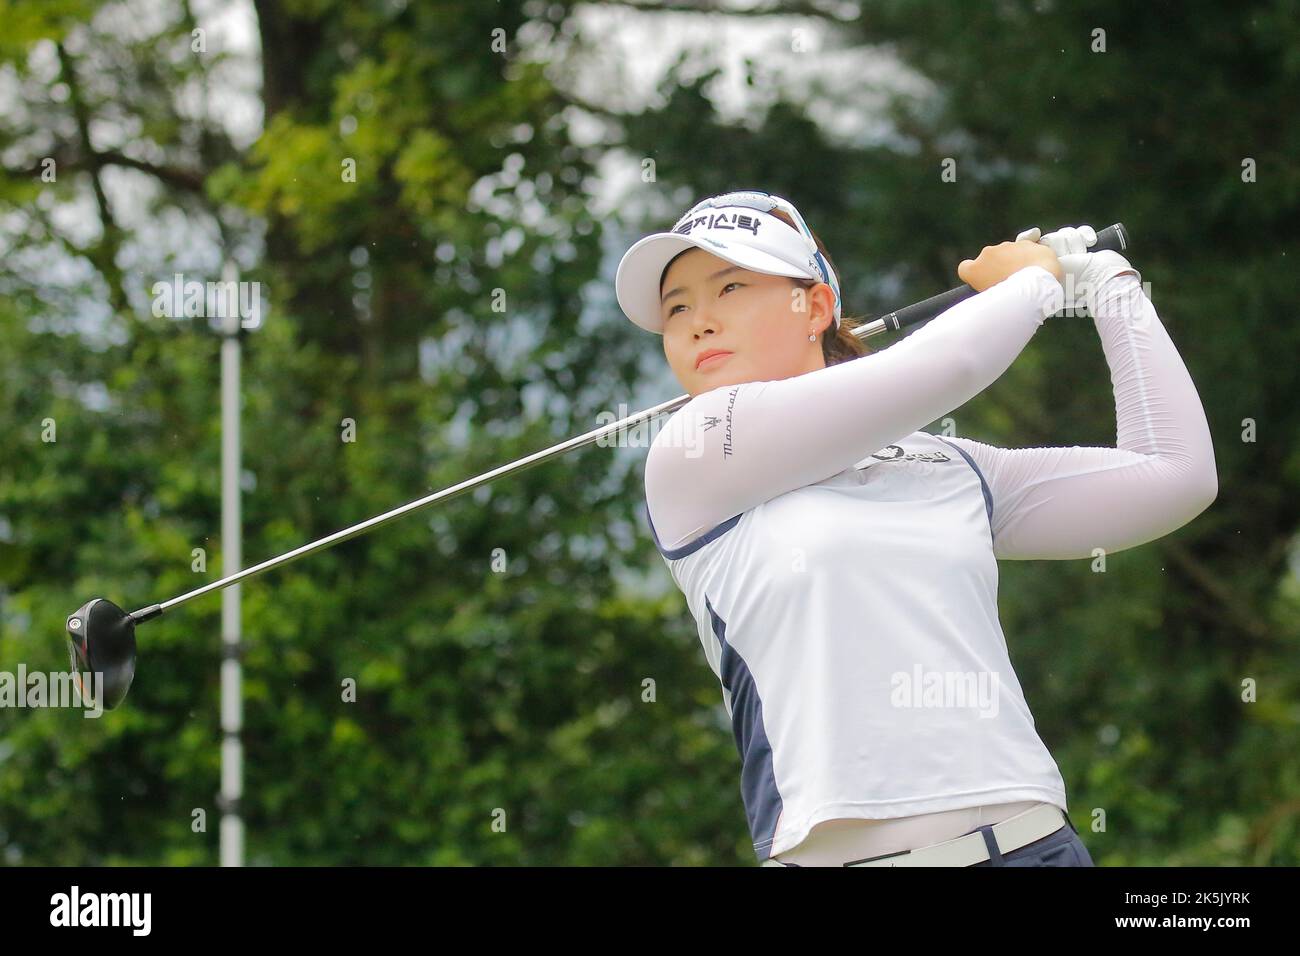 Aug 25, 2022-Chuncheon, South Korea-Lim Hee Jeong action on the 9th hall during an Hanhwa Classic 2022 Round 1 at Jade Palace Golf Club in Chun Cheon, South Korea. Stock Photo